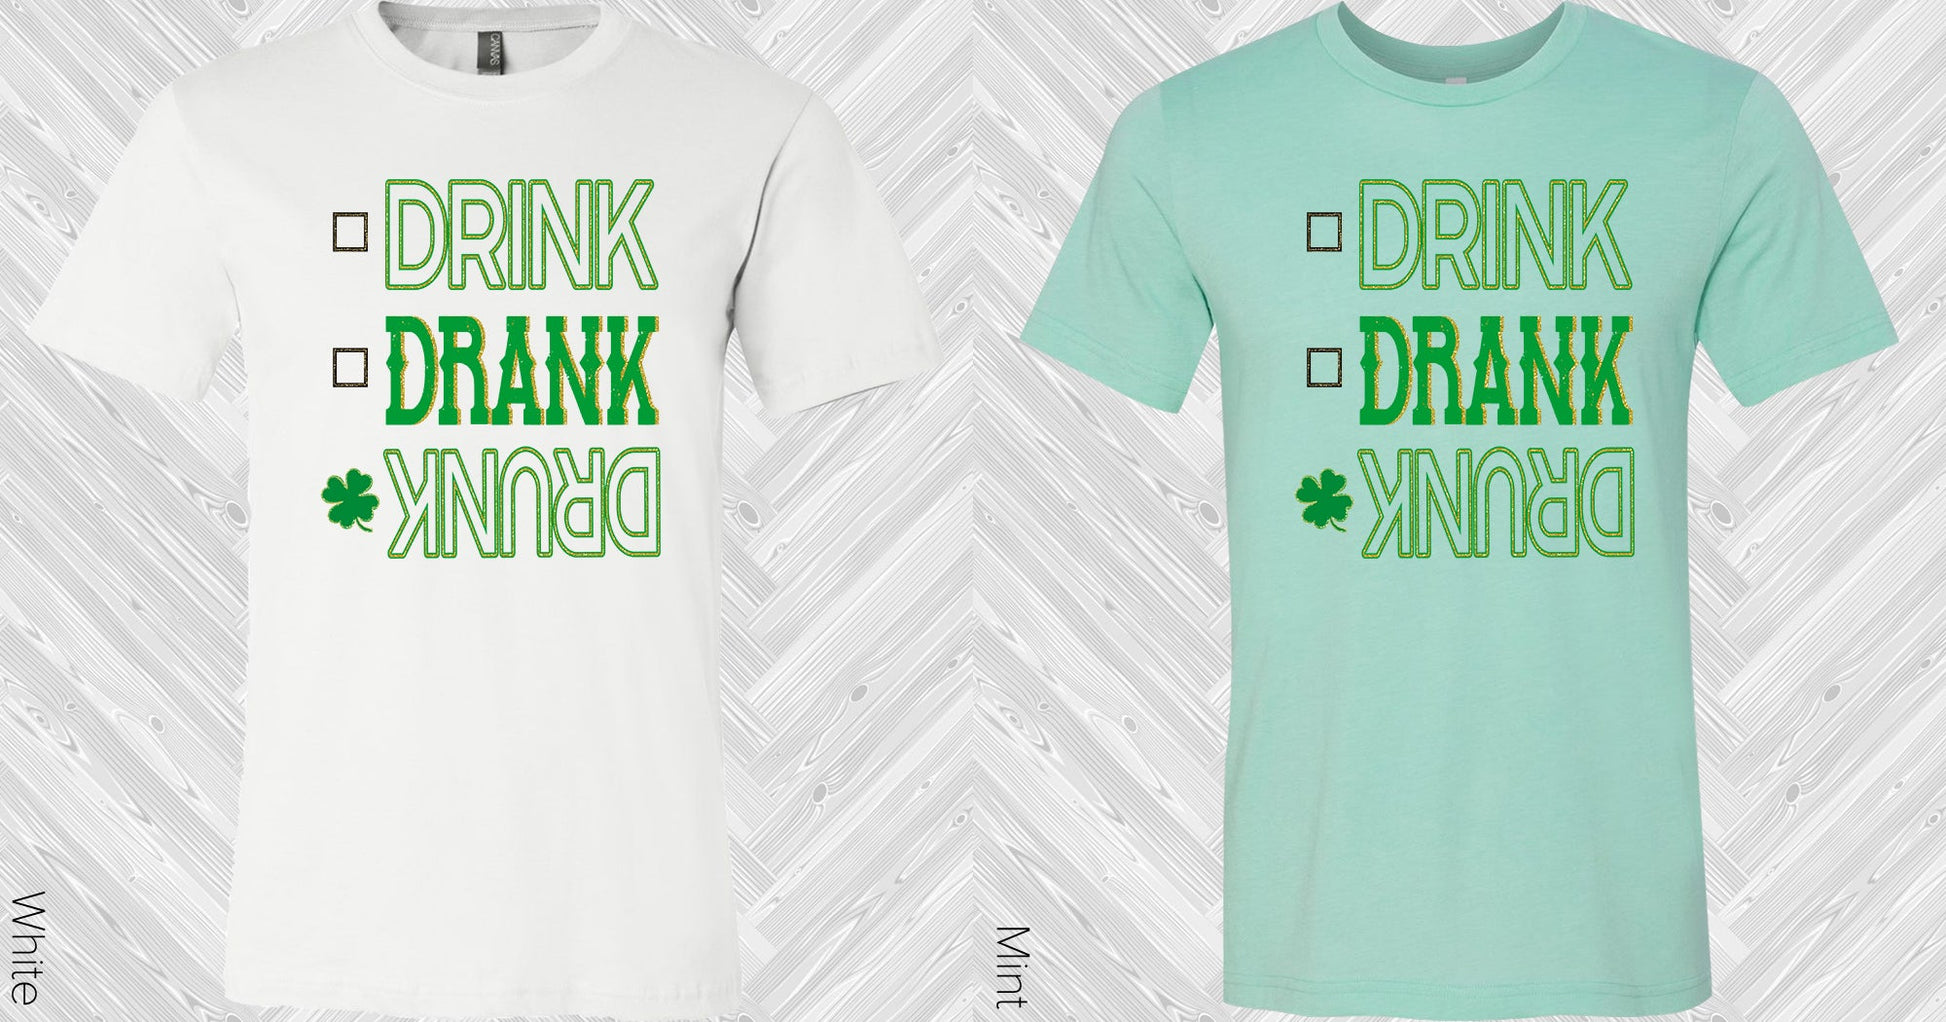 Drink Drank Drunk Graphic Tee Graphic Tee